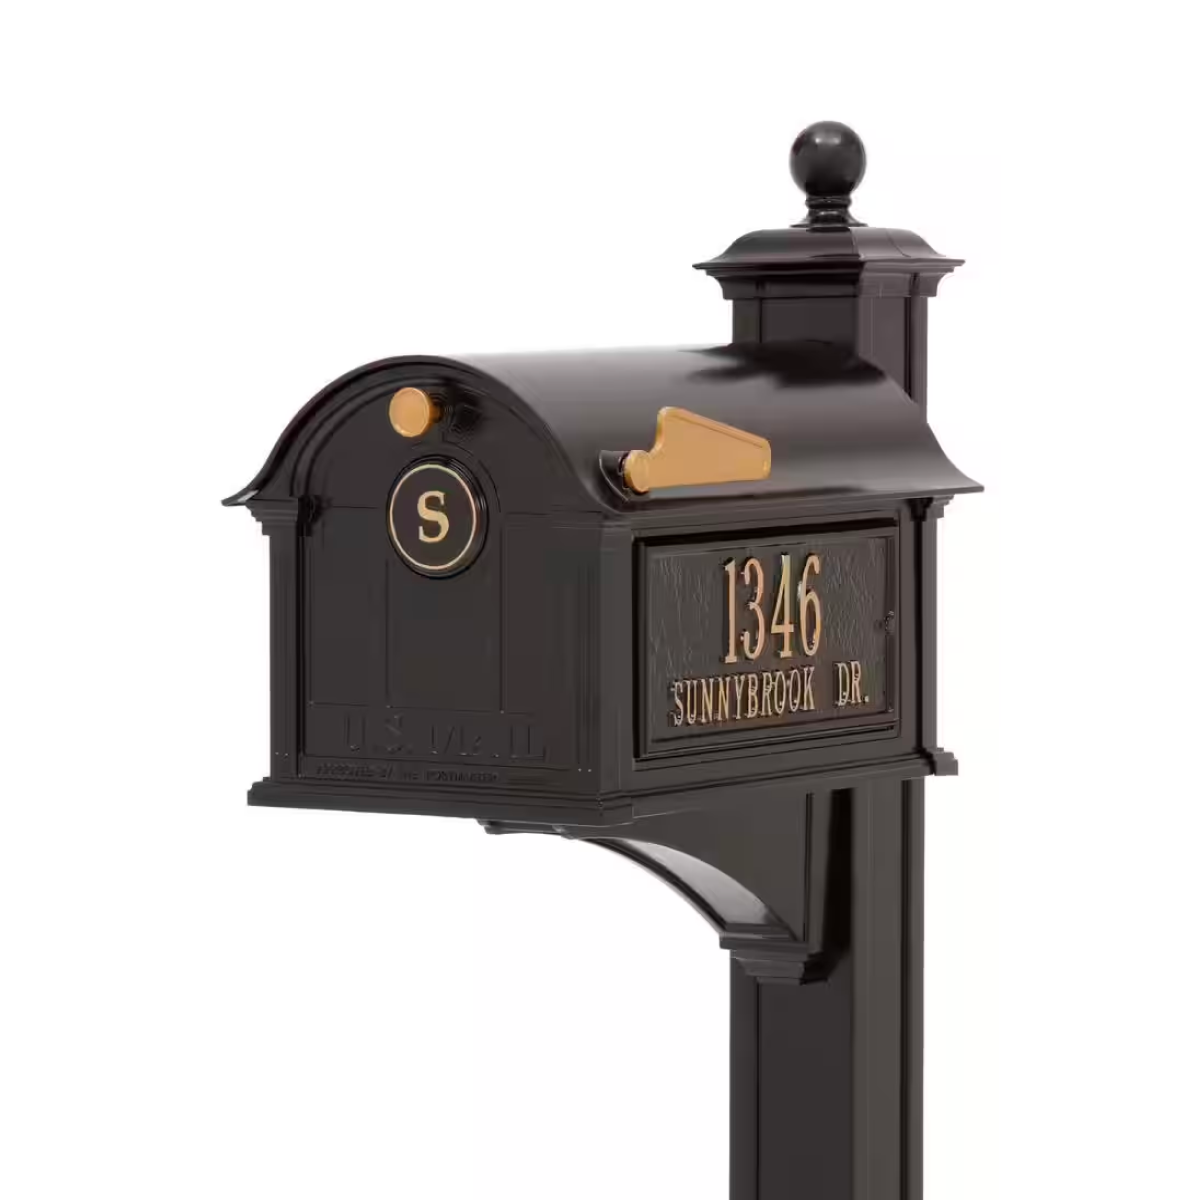 Whitehall Balmoral Monogram Mailbox Package Product Image